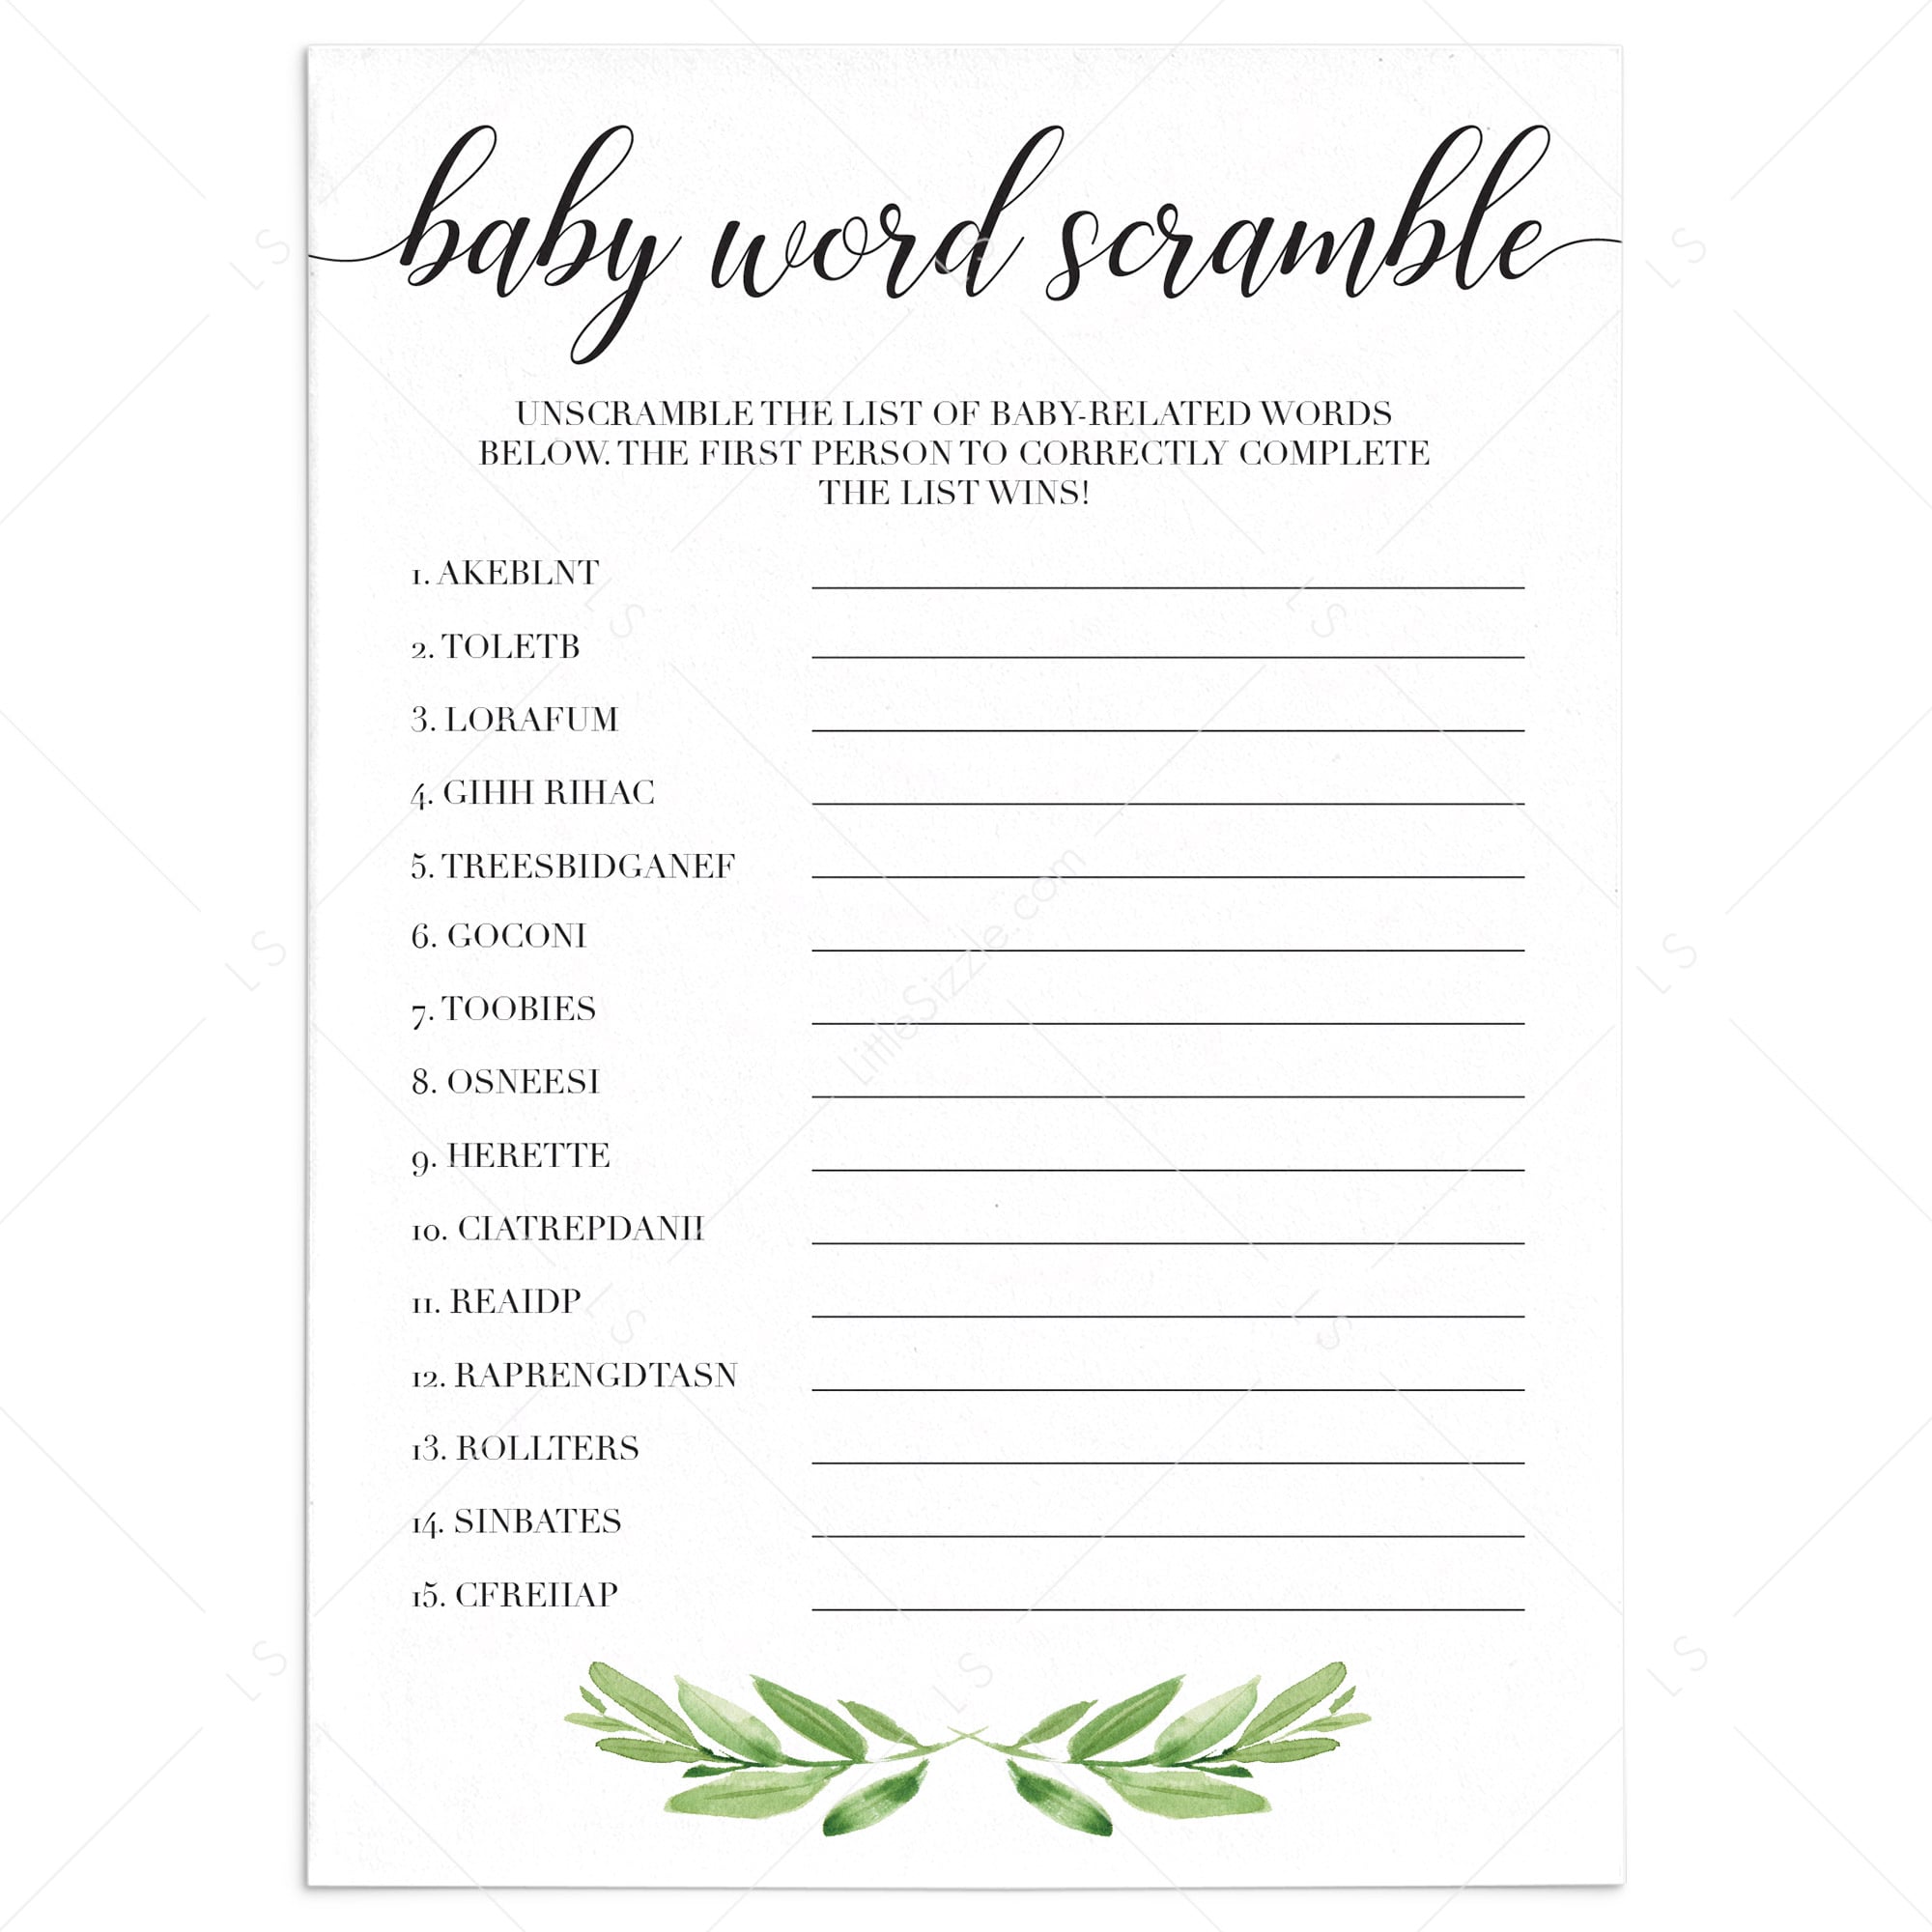 Virtual Baby Word Scramble game for gender neutral baby shower